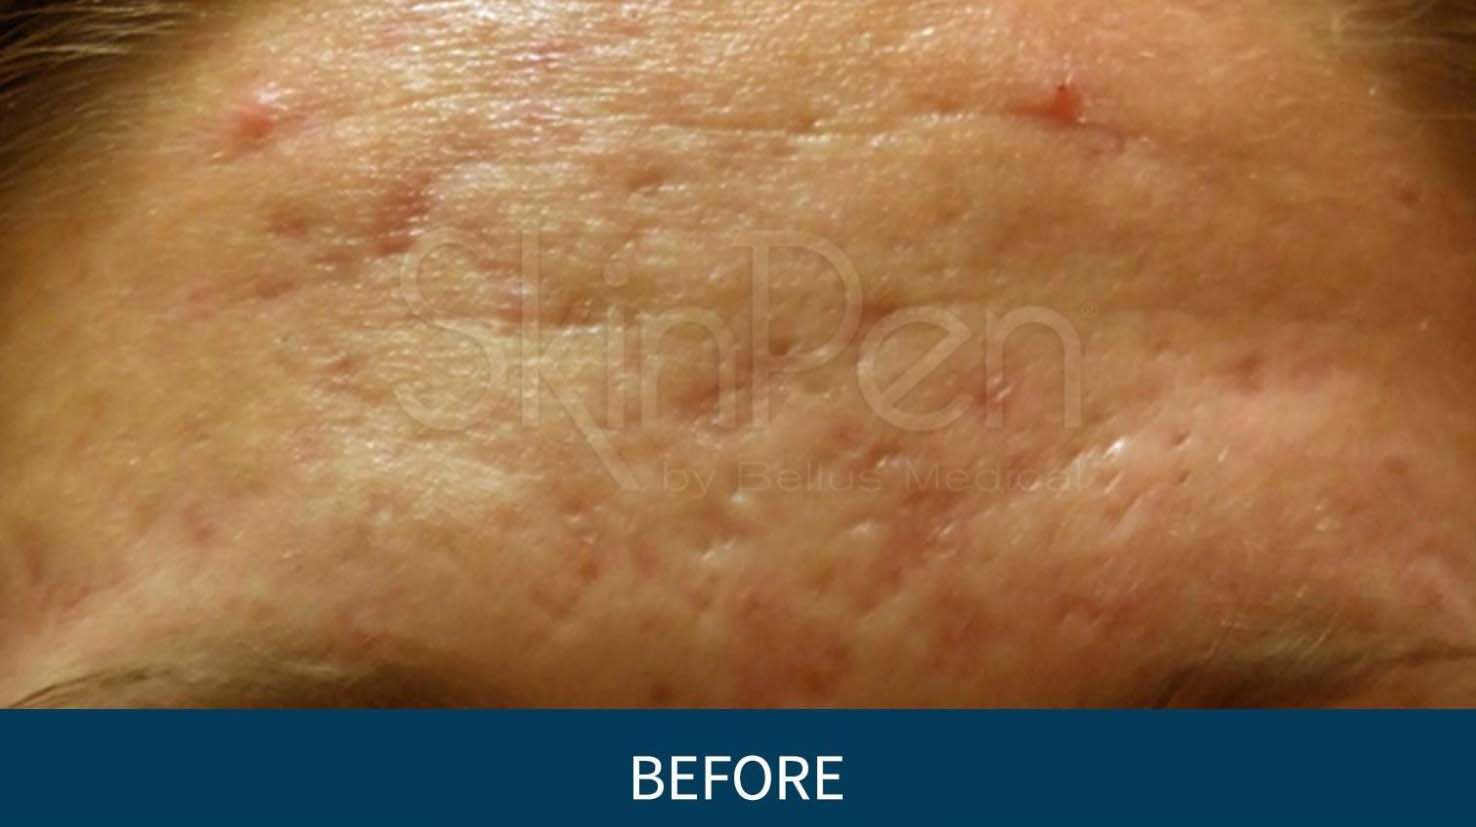 Acne Scar Removal Before & After Results